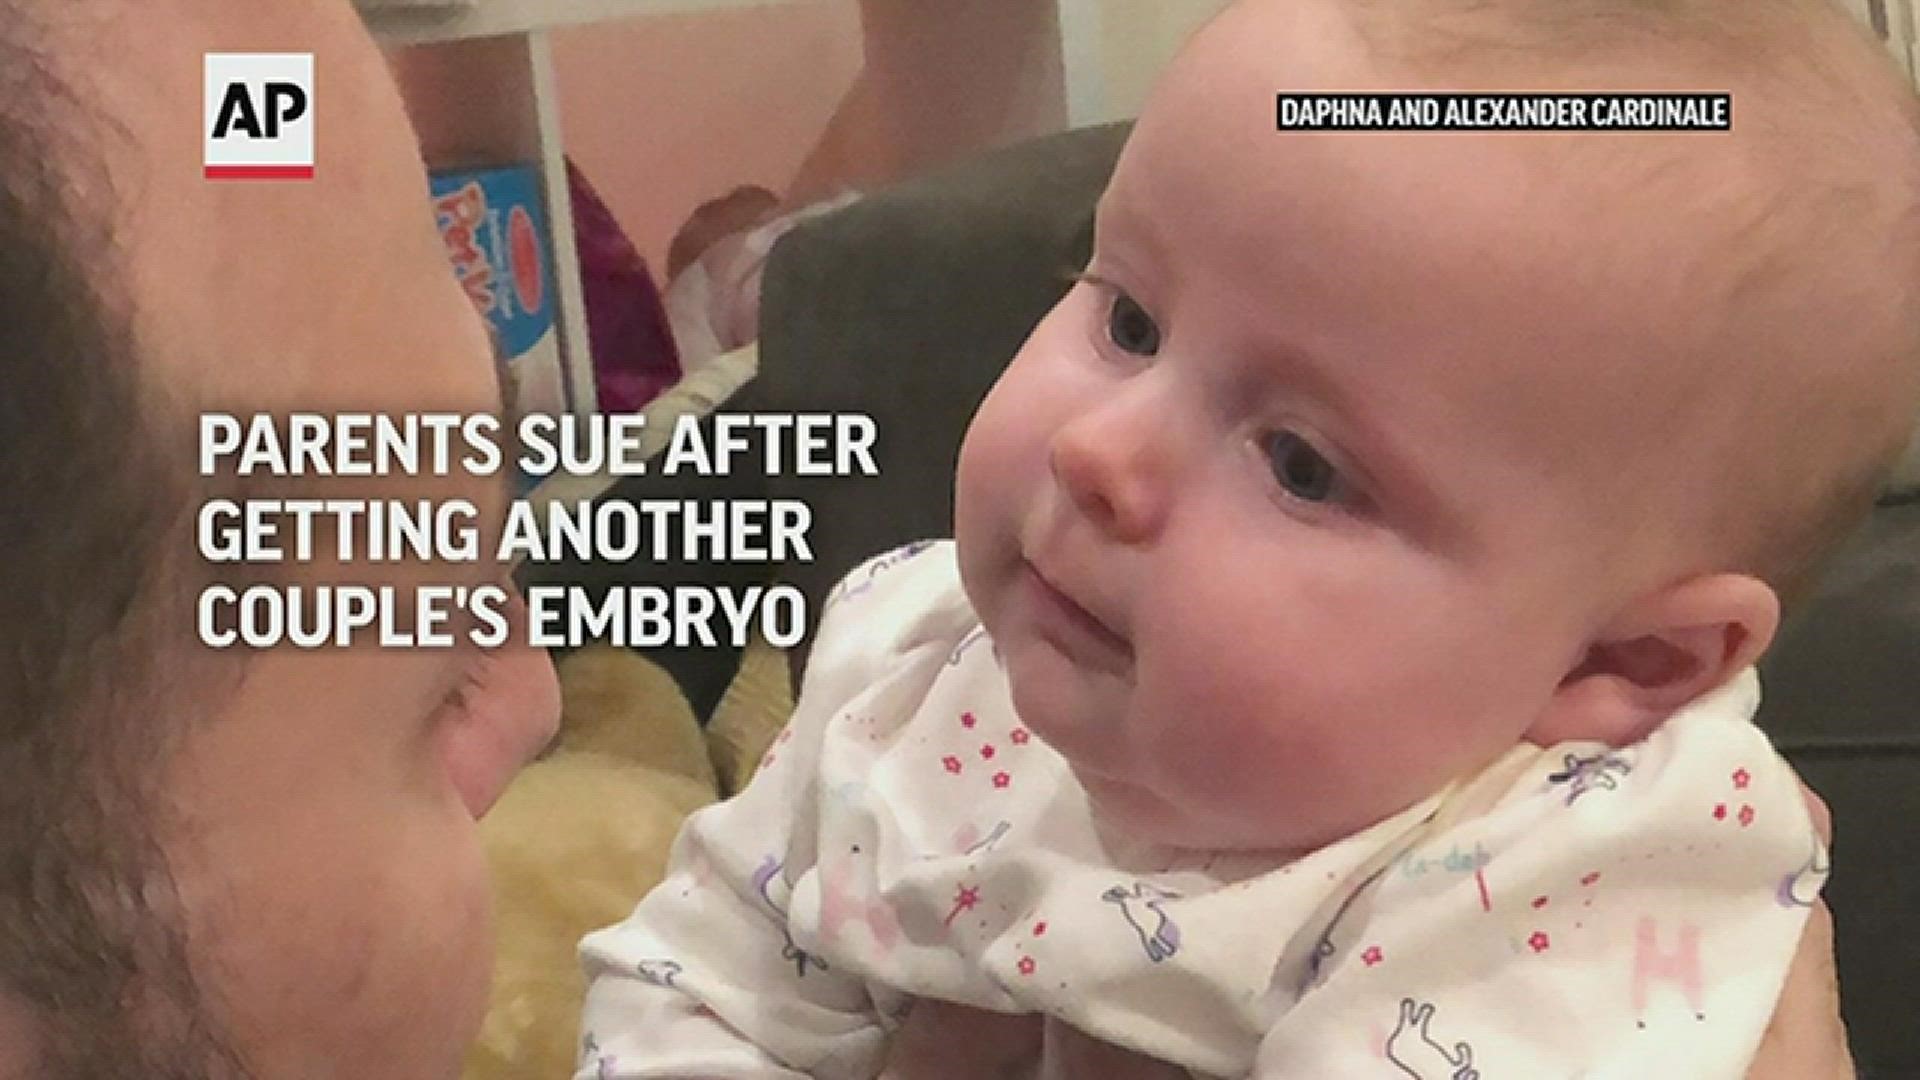 Two California couples gave birth to each others' babies after a mix-up at a fertility clinic and spent months raising children that weren't theirs, a lawsuit says.